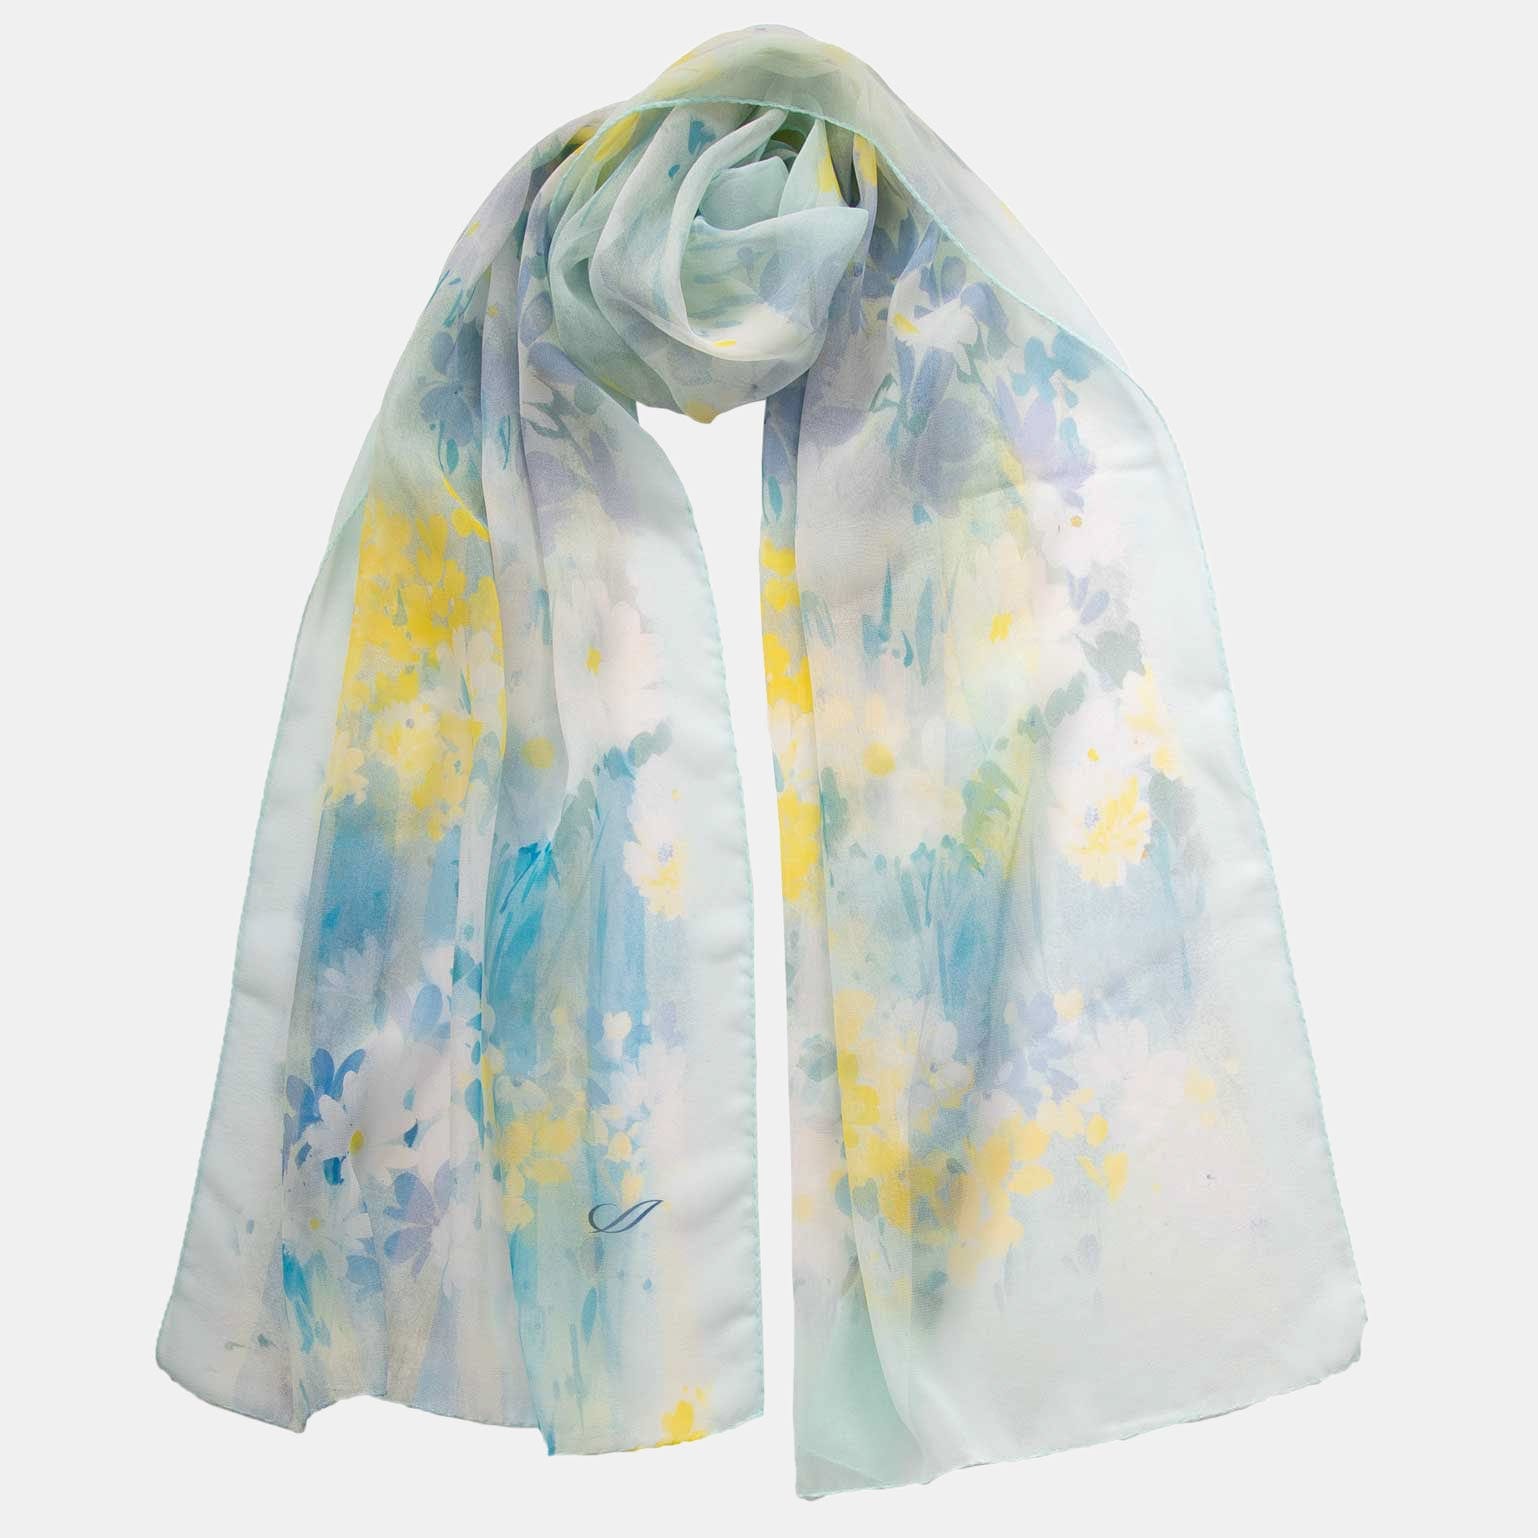 Teal Silk Scarf - Floral Print Made in Italy - Elizabetta